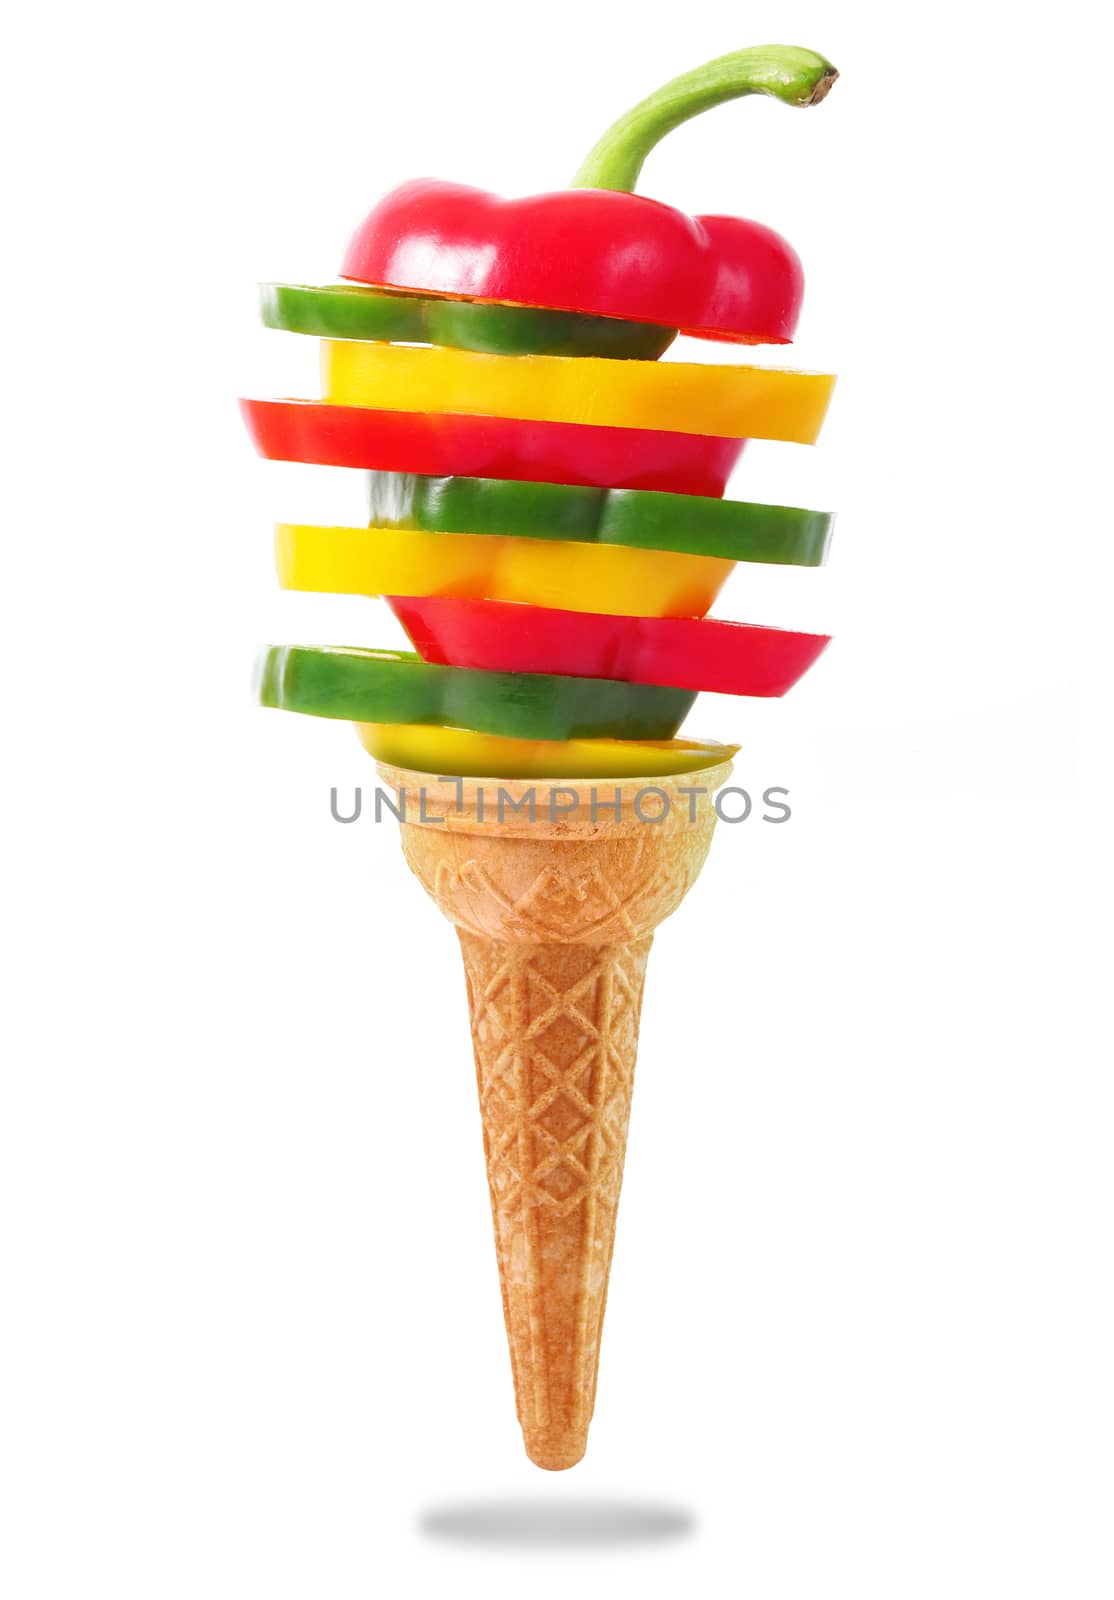 Delicious ice cream cone with pepper taste by photobeps